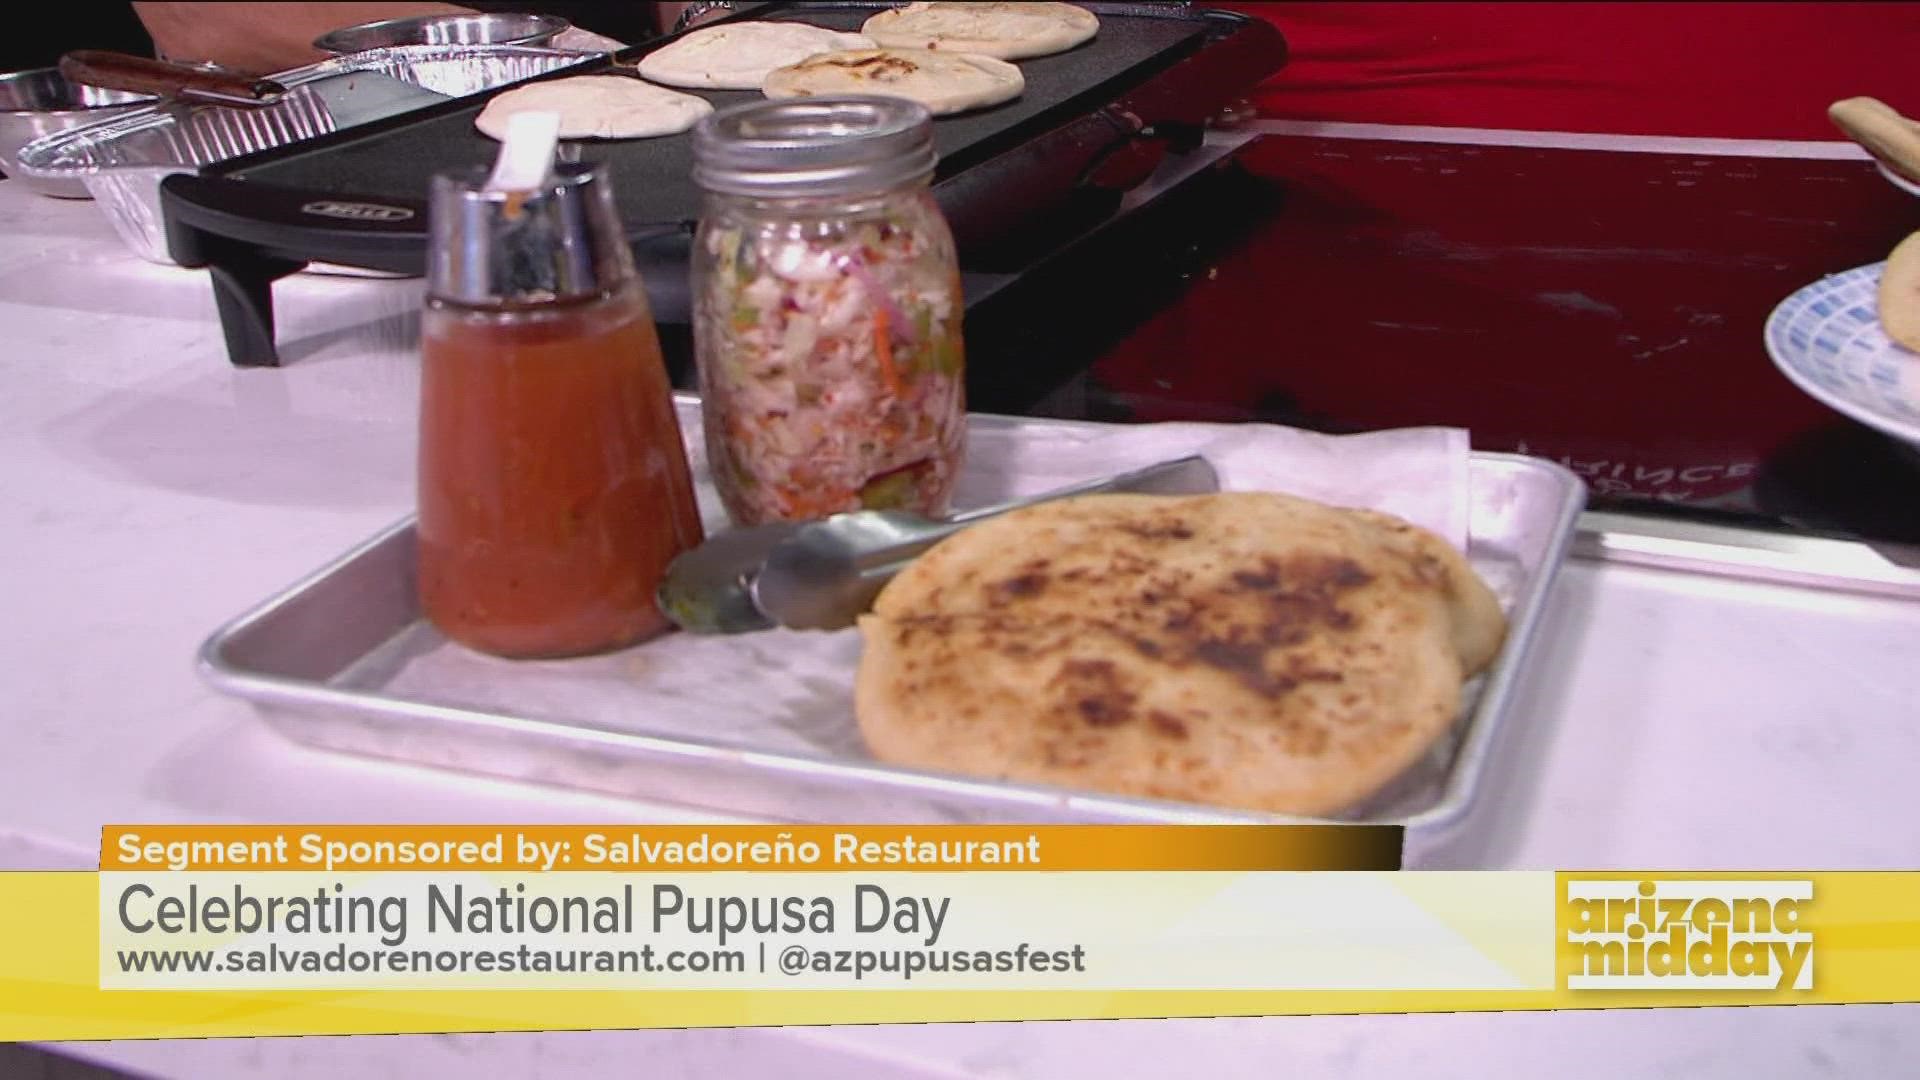 The Arizona Pupusa Festival is happening this weekend. Don't know what it is? Yesenia Ramirez from Salvadoreño Restaurant shows us.